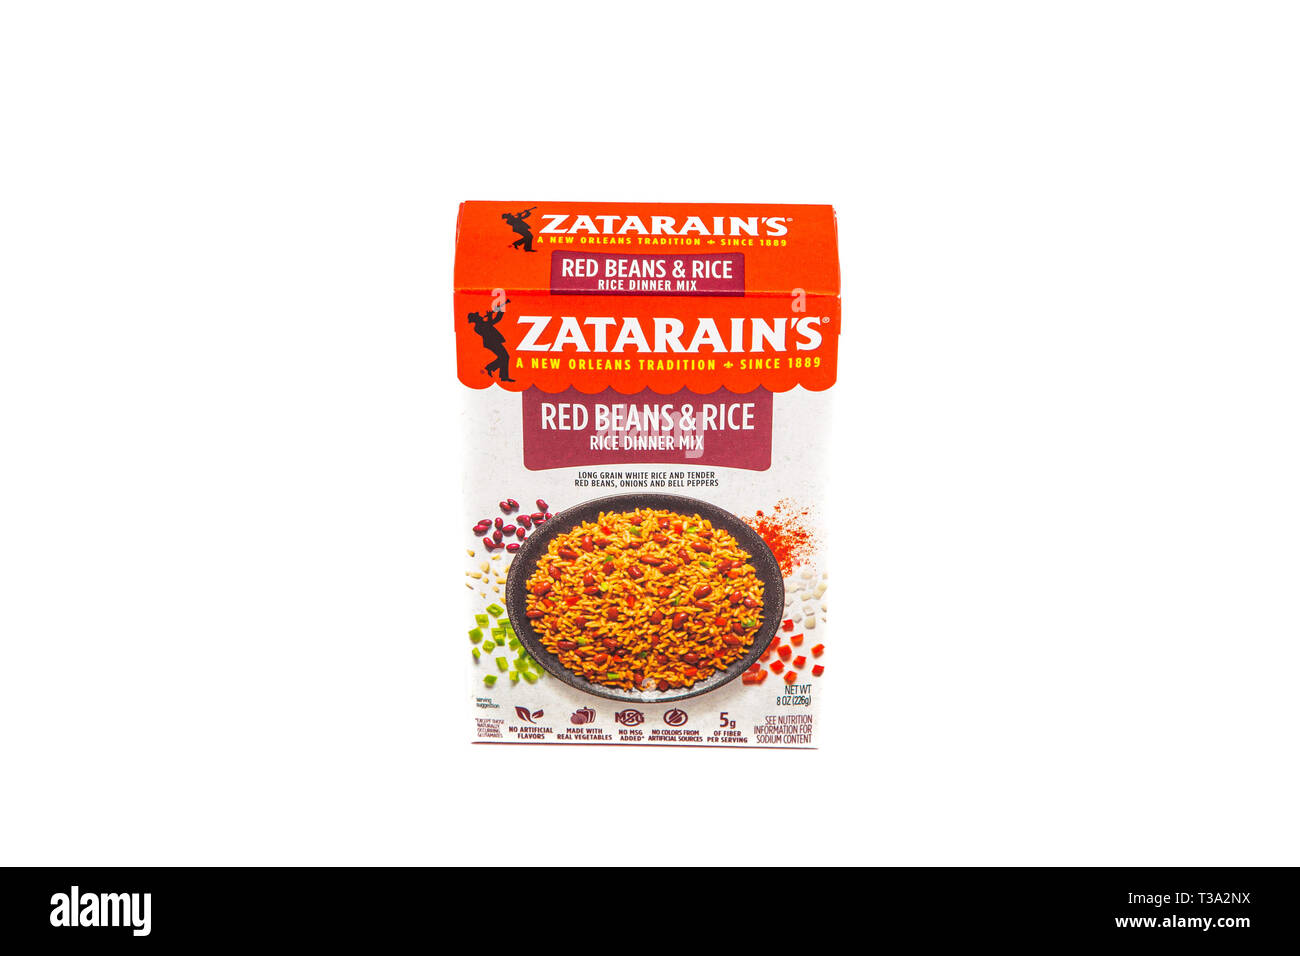 Zatarain's New Orleans Style Rice With Red Beans: Nutrition & Ingredients